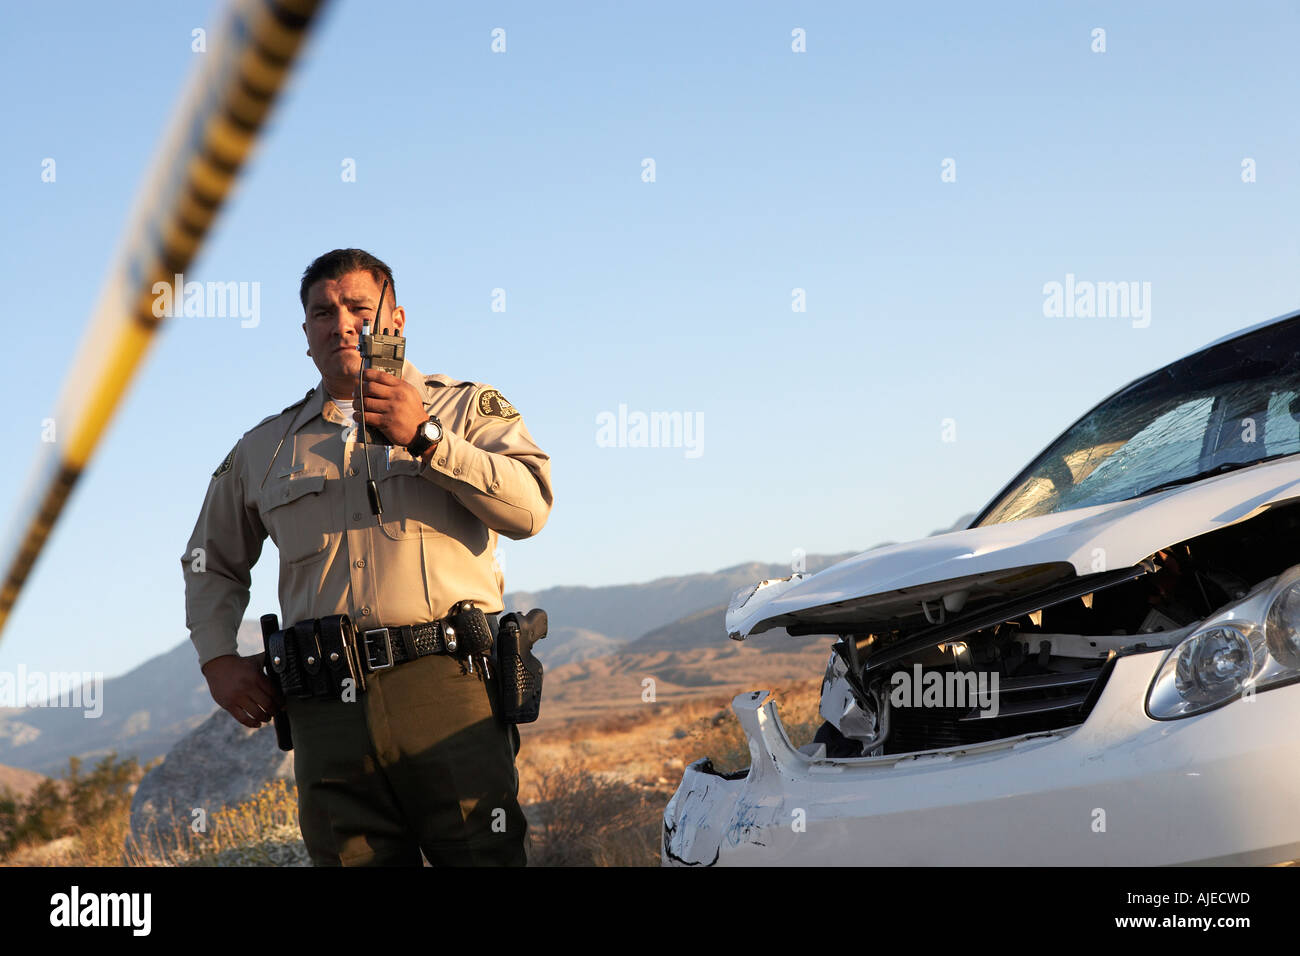 Police officer using walkie-talkie next to wrecked car Stock Photo